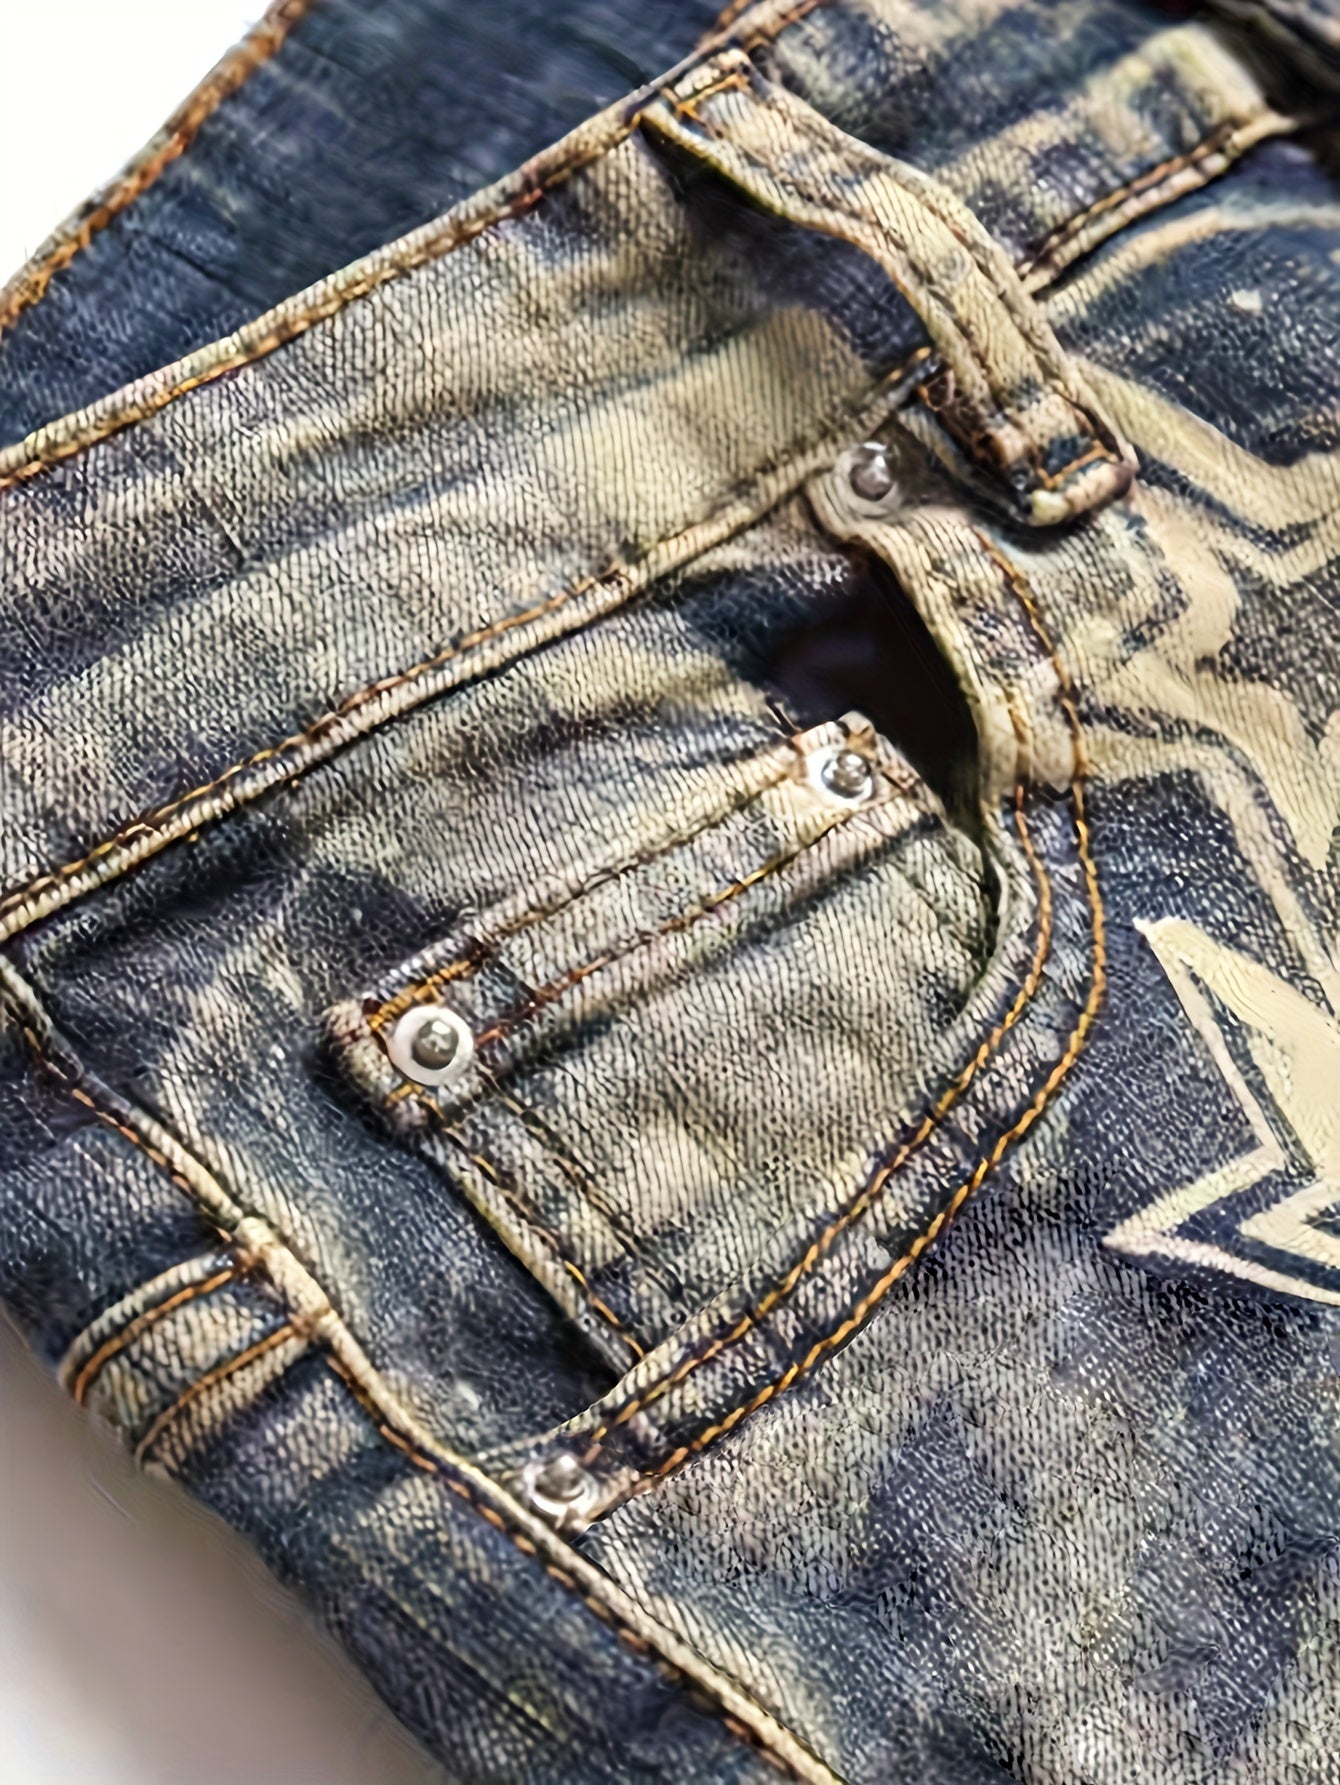 Starboy Distressed Jeans